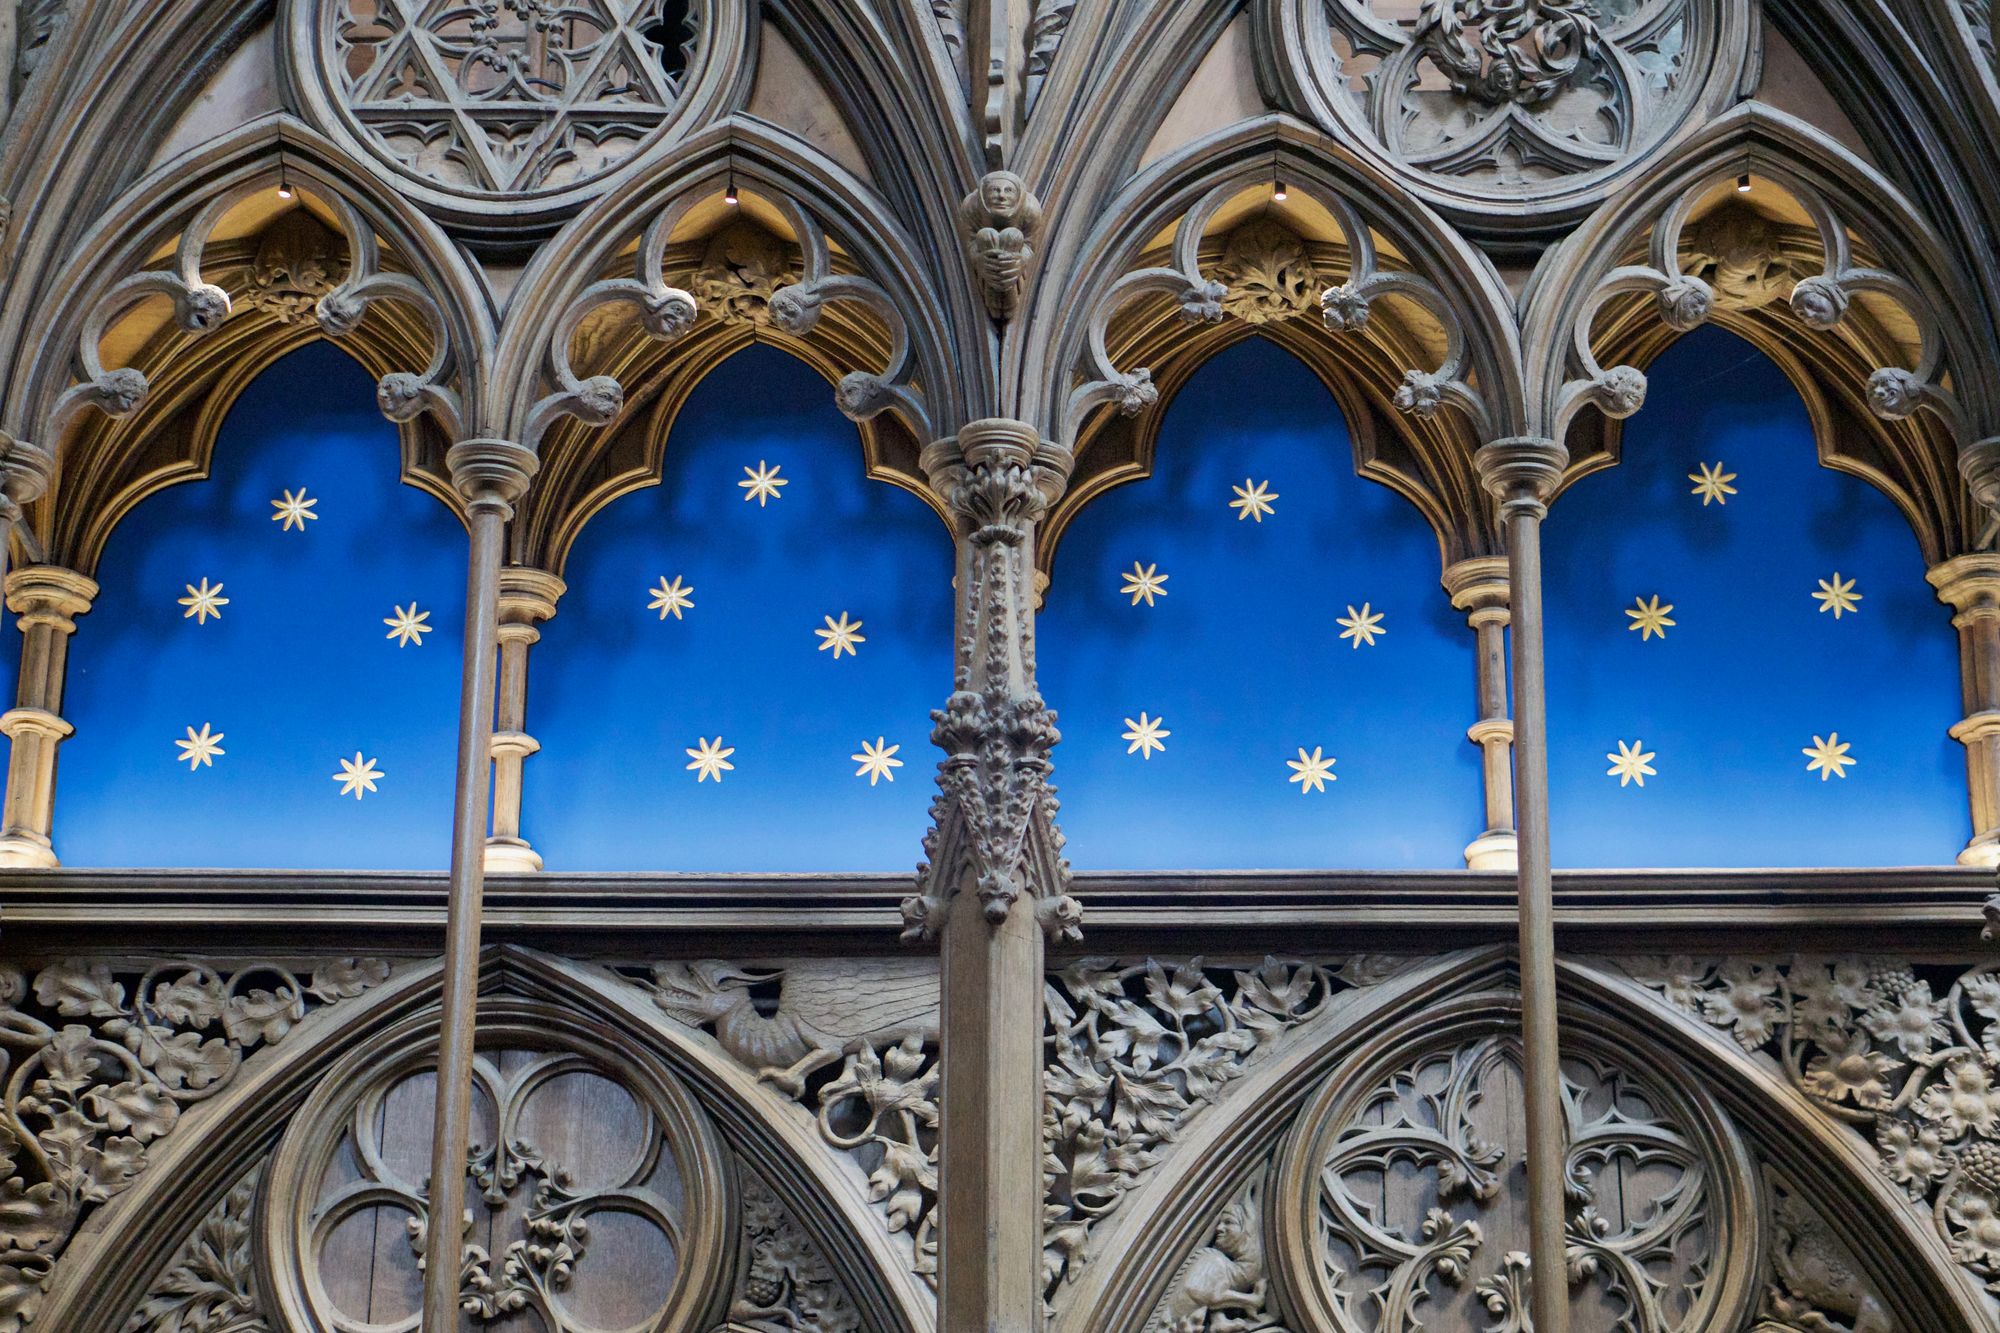 Arches in the cathedral wall with a blue backdrop with five gilded stars in each segment.